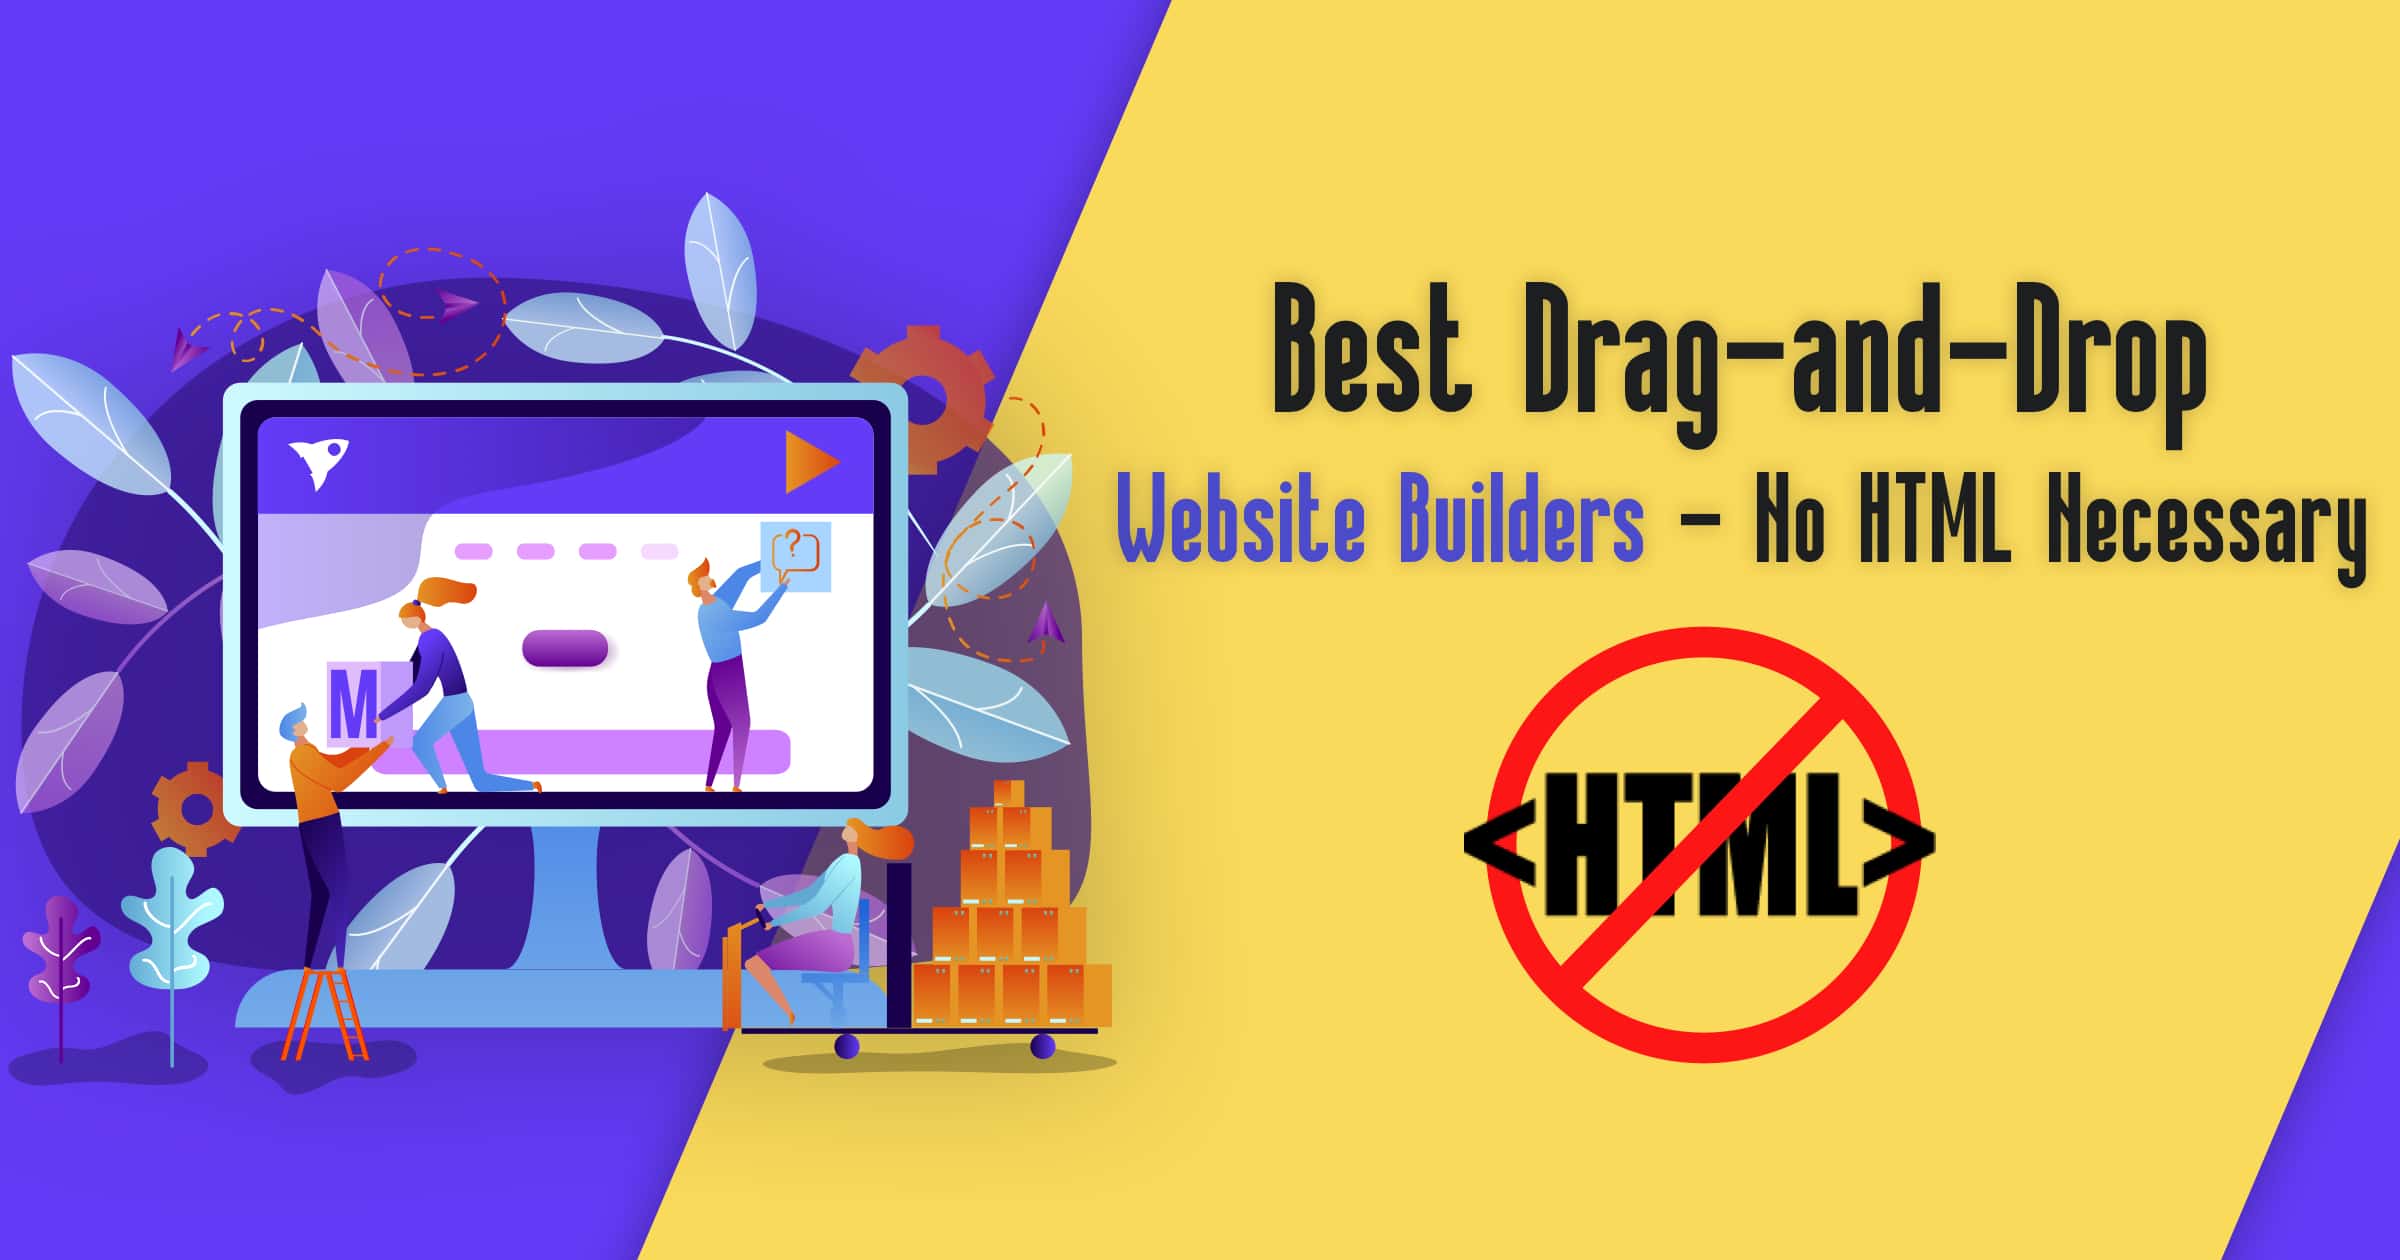 6 Absolute Best Drag Drop Website Builders In 2020 5 Are Free Images, Photos, Reviews